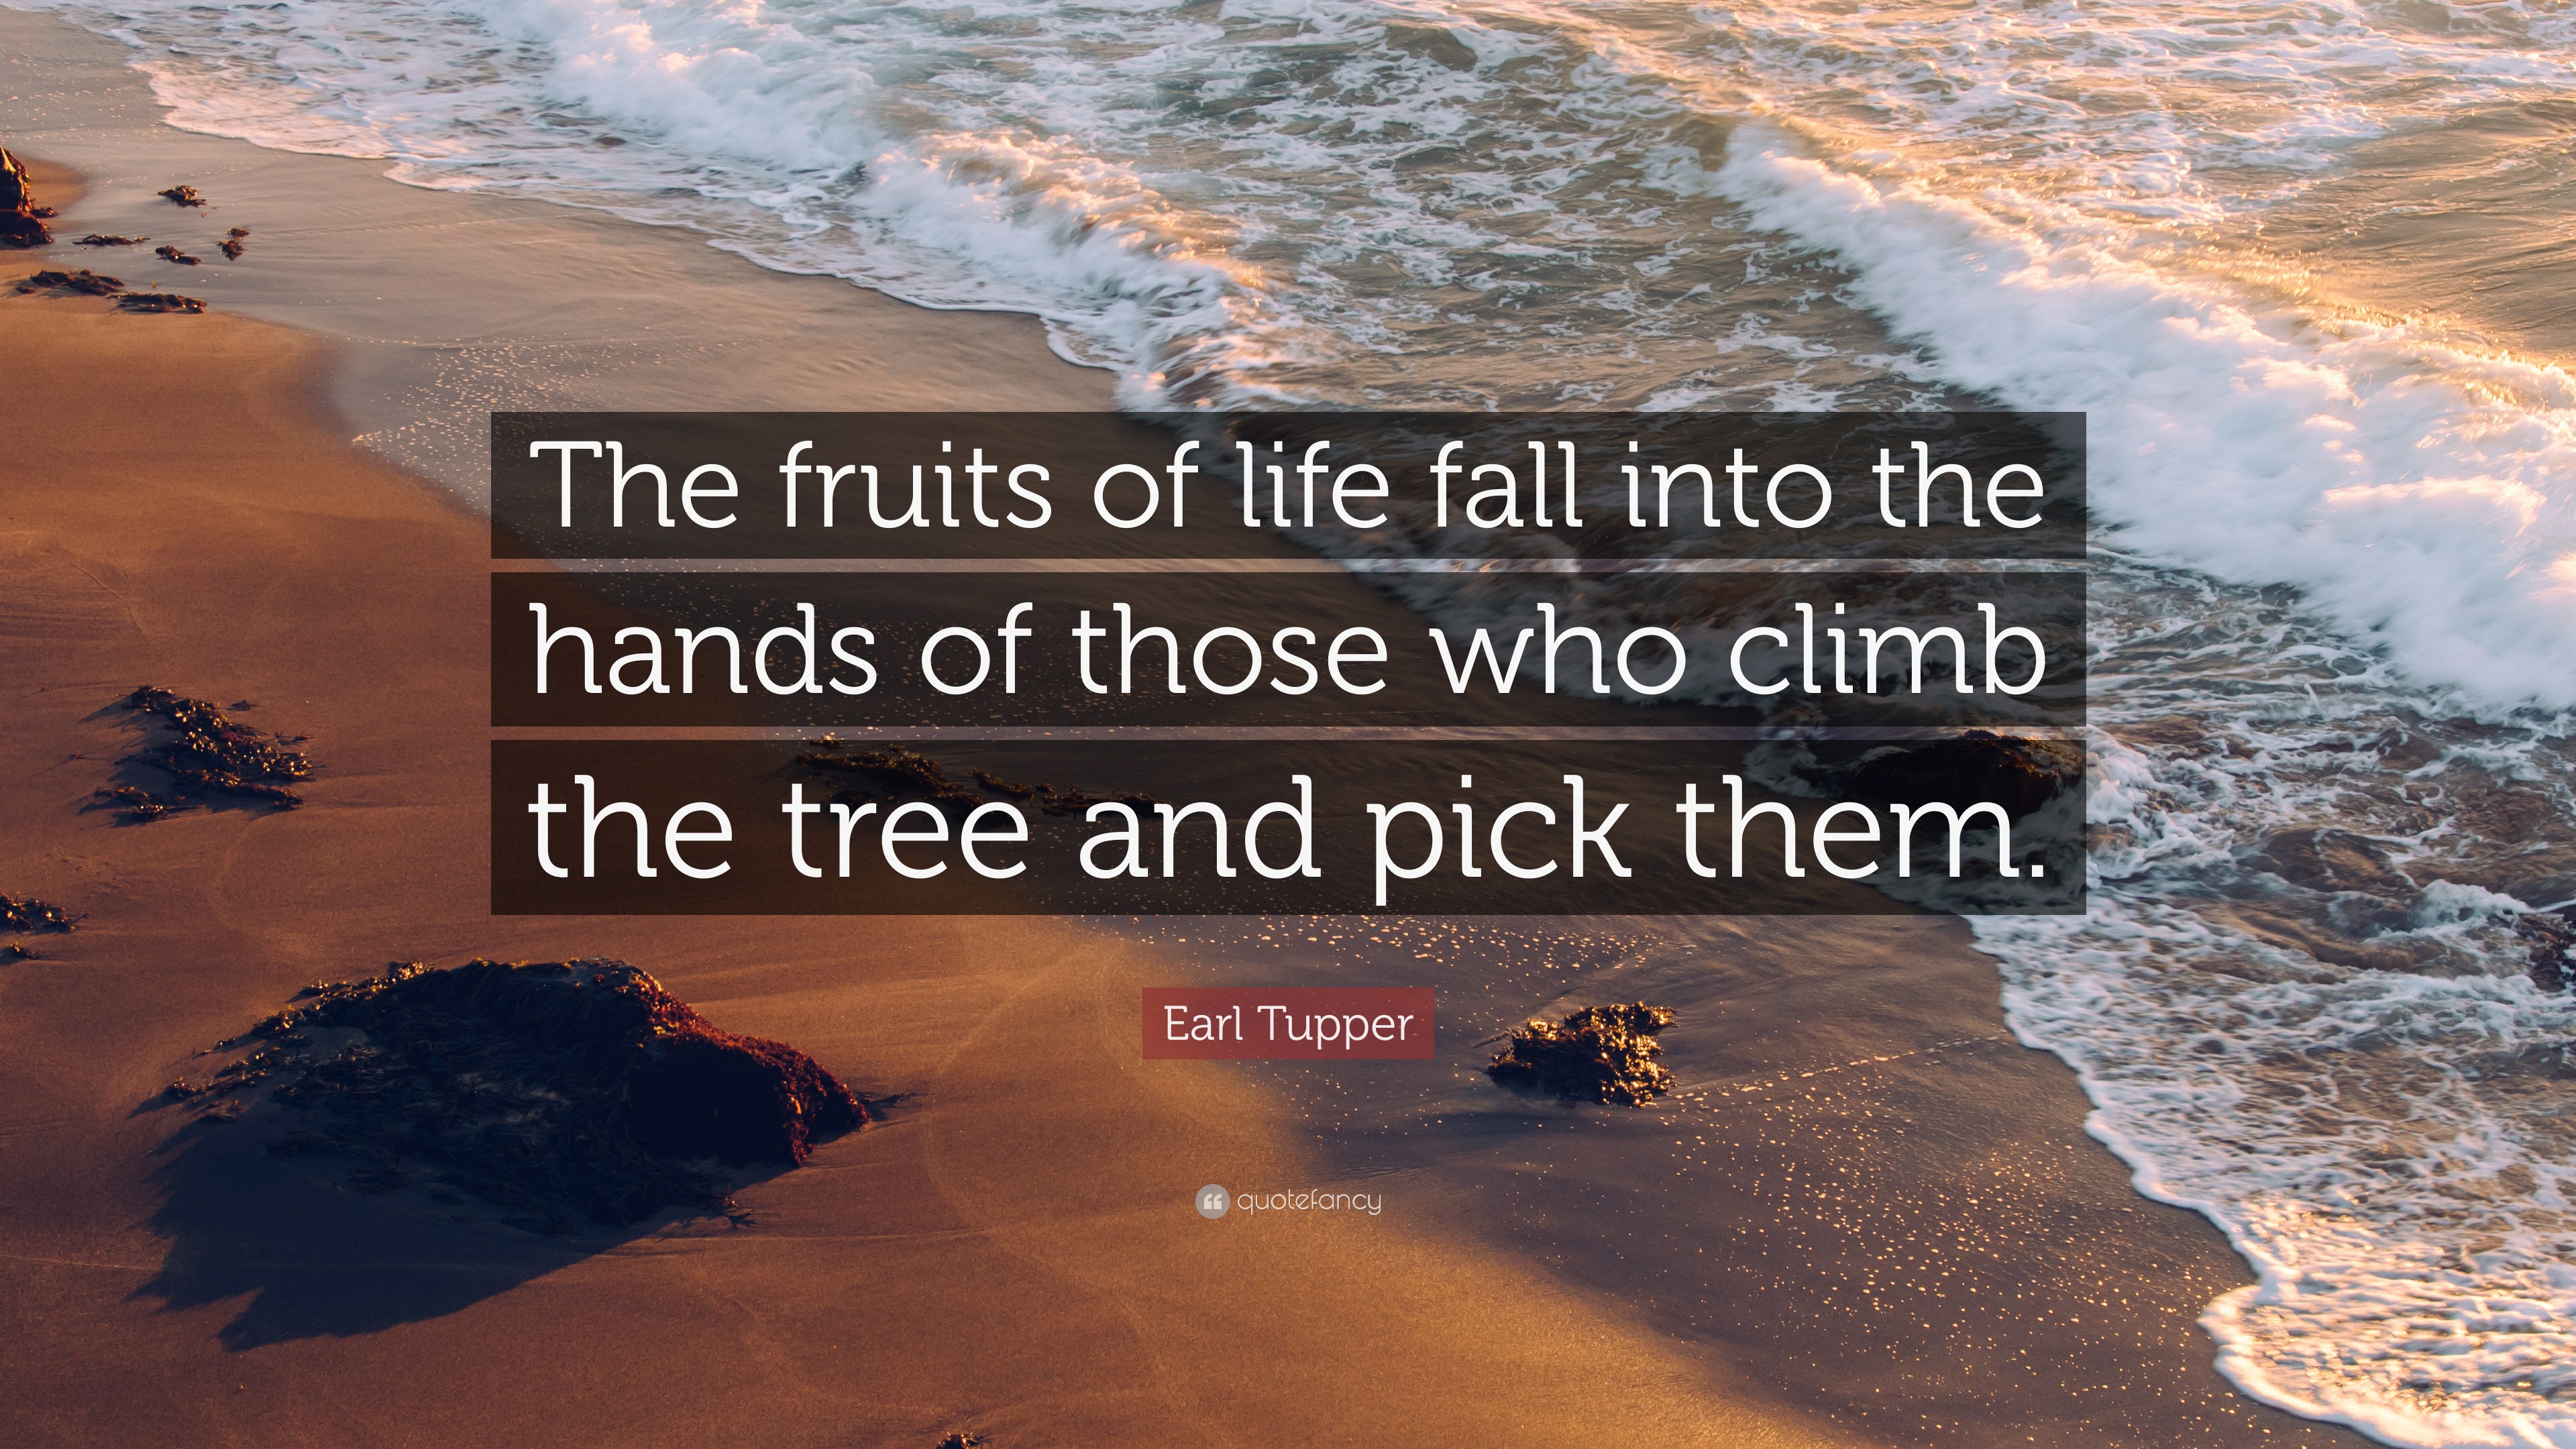 Earl Tupper Quote: “The fruits of life fall into the hands of